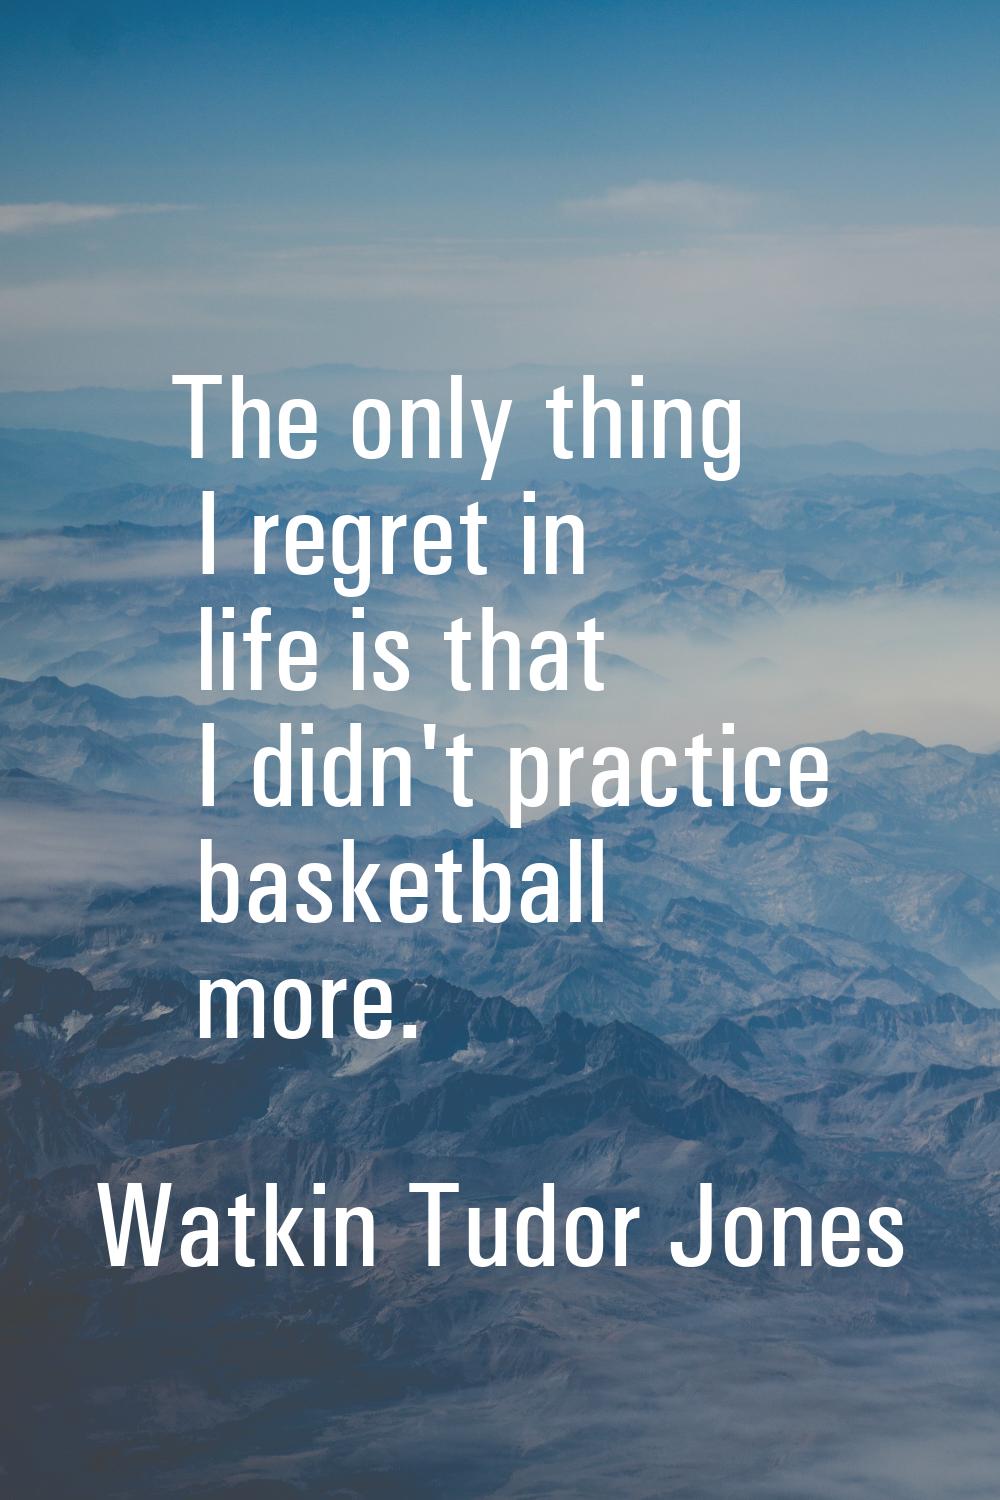 The only thing I regret in life is that I didn't practice basketball more.